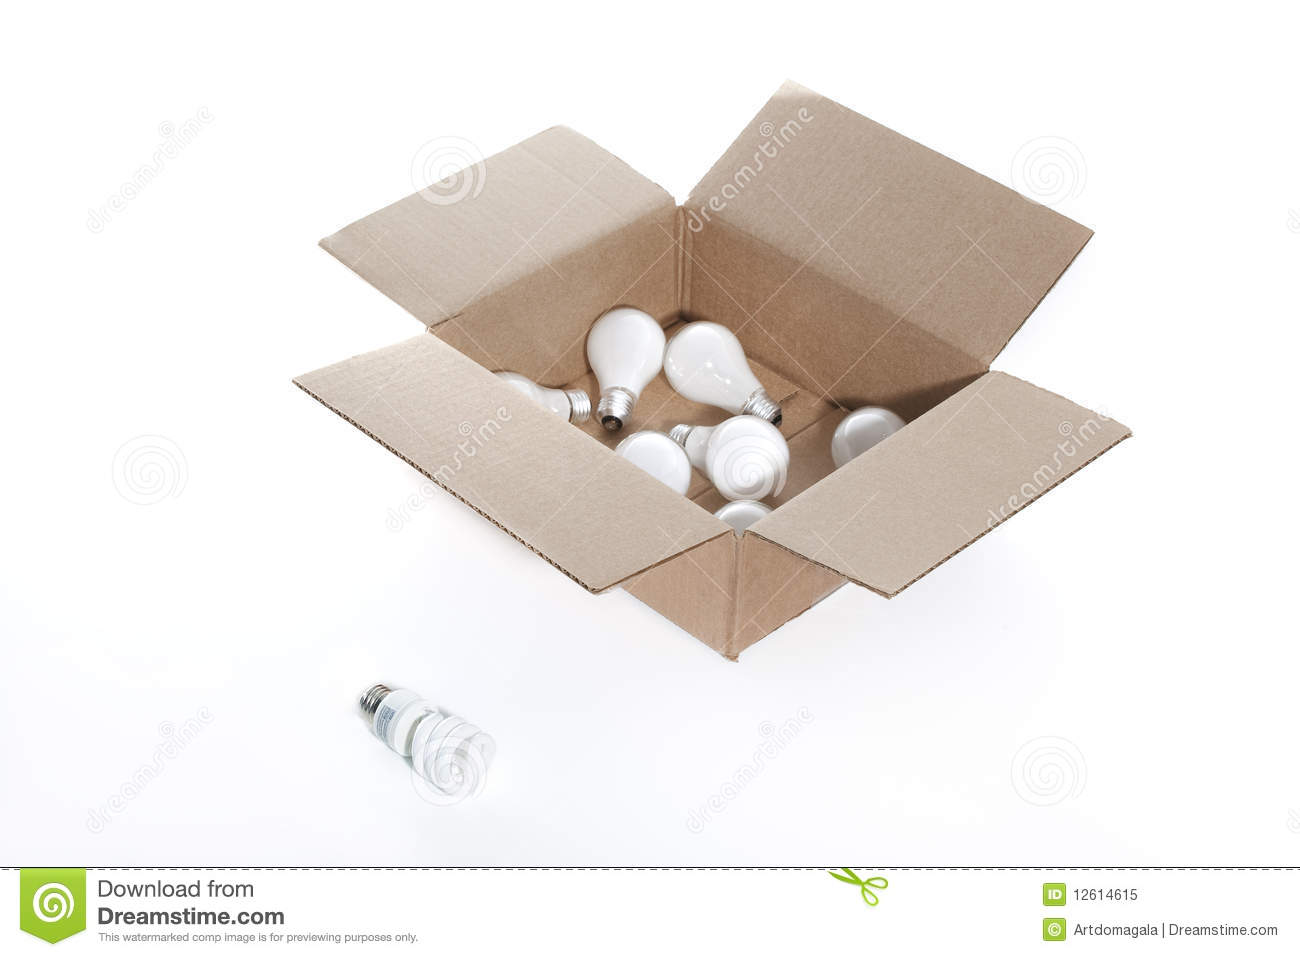 Think Outside The Box Royalty Free Stock Photo   Image  12614615